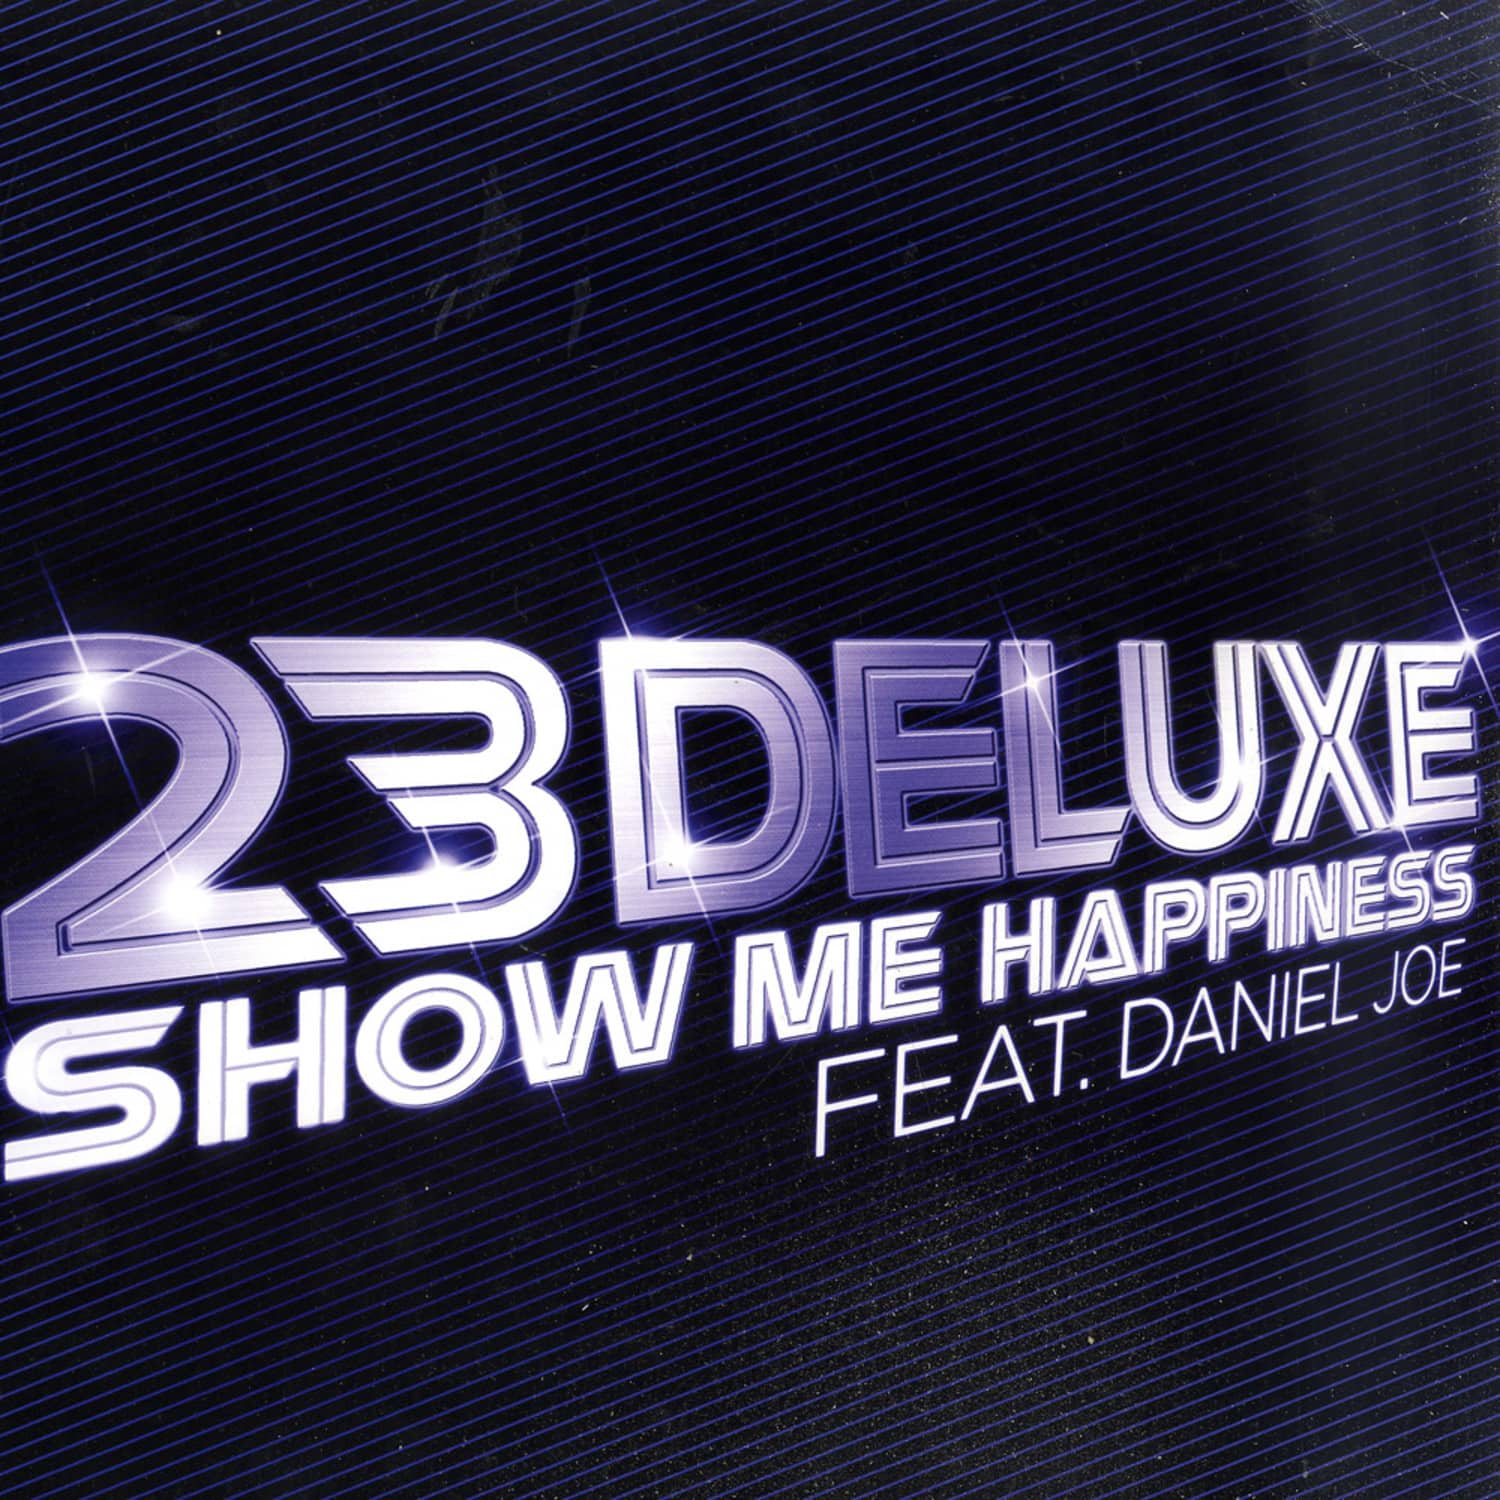 23 Deluxe - SHOW ME HAPPINESS